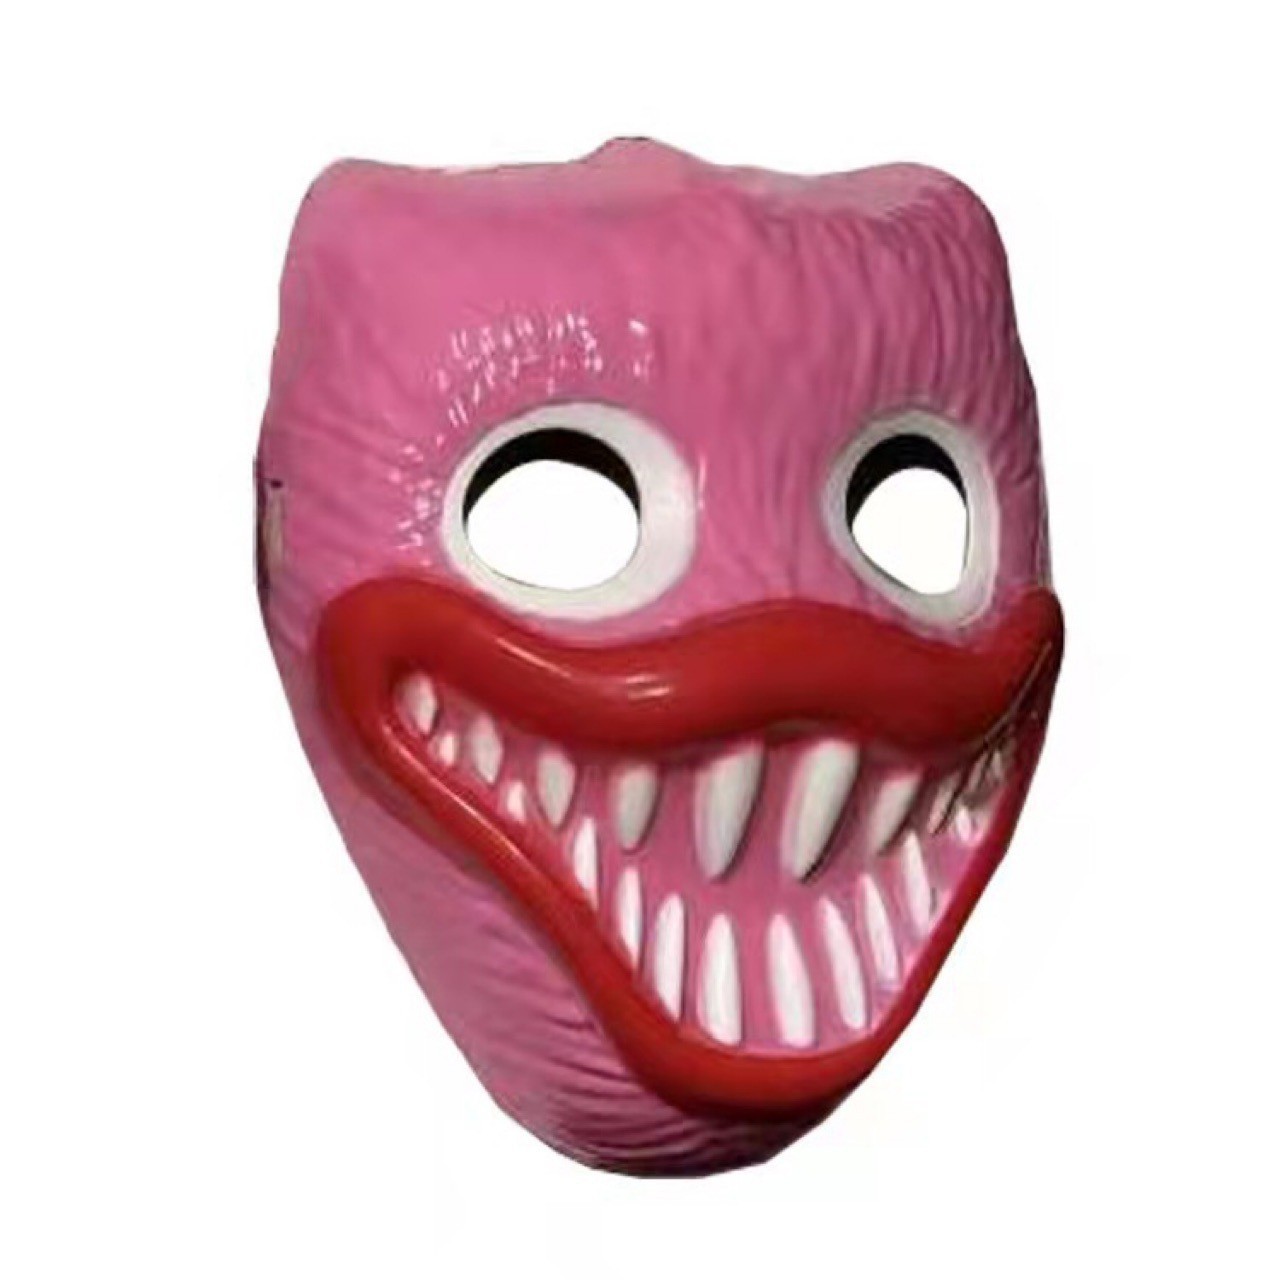 Bobby's Game Time Poppy Playtime Halloween Mask New Plastic Half Face Mask Wholesale